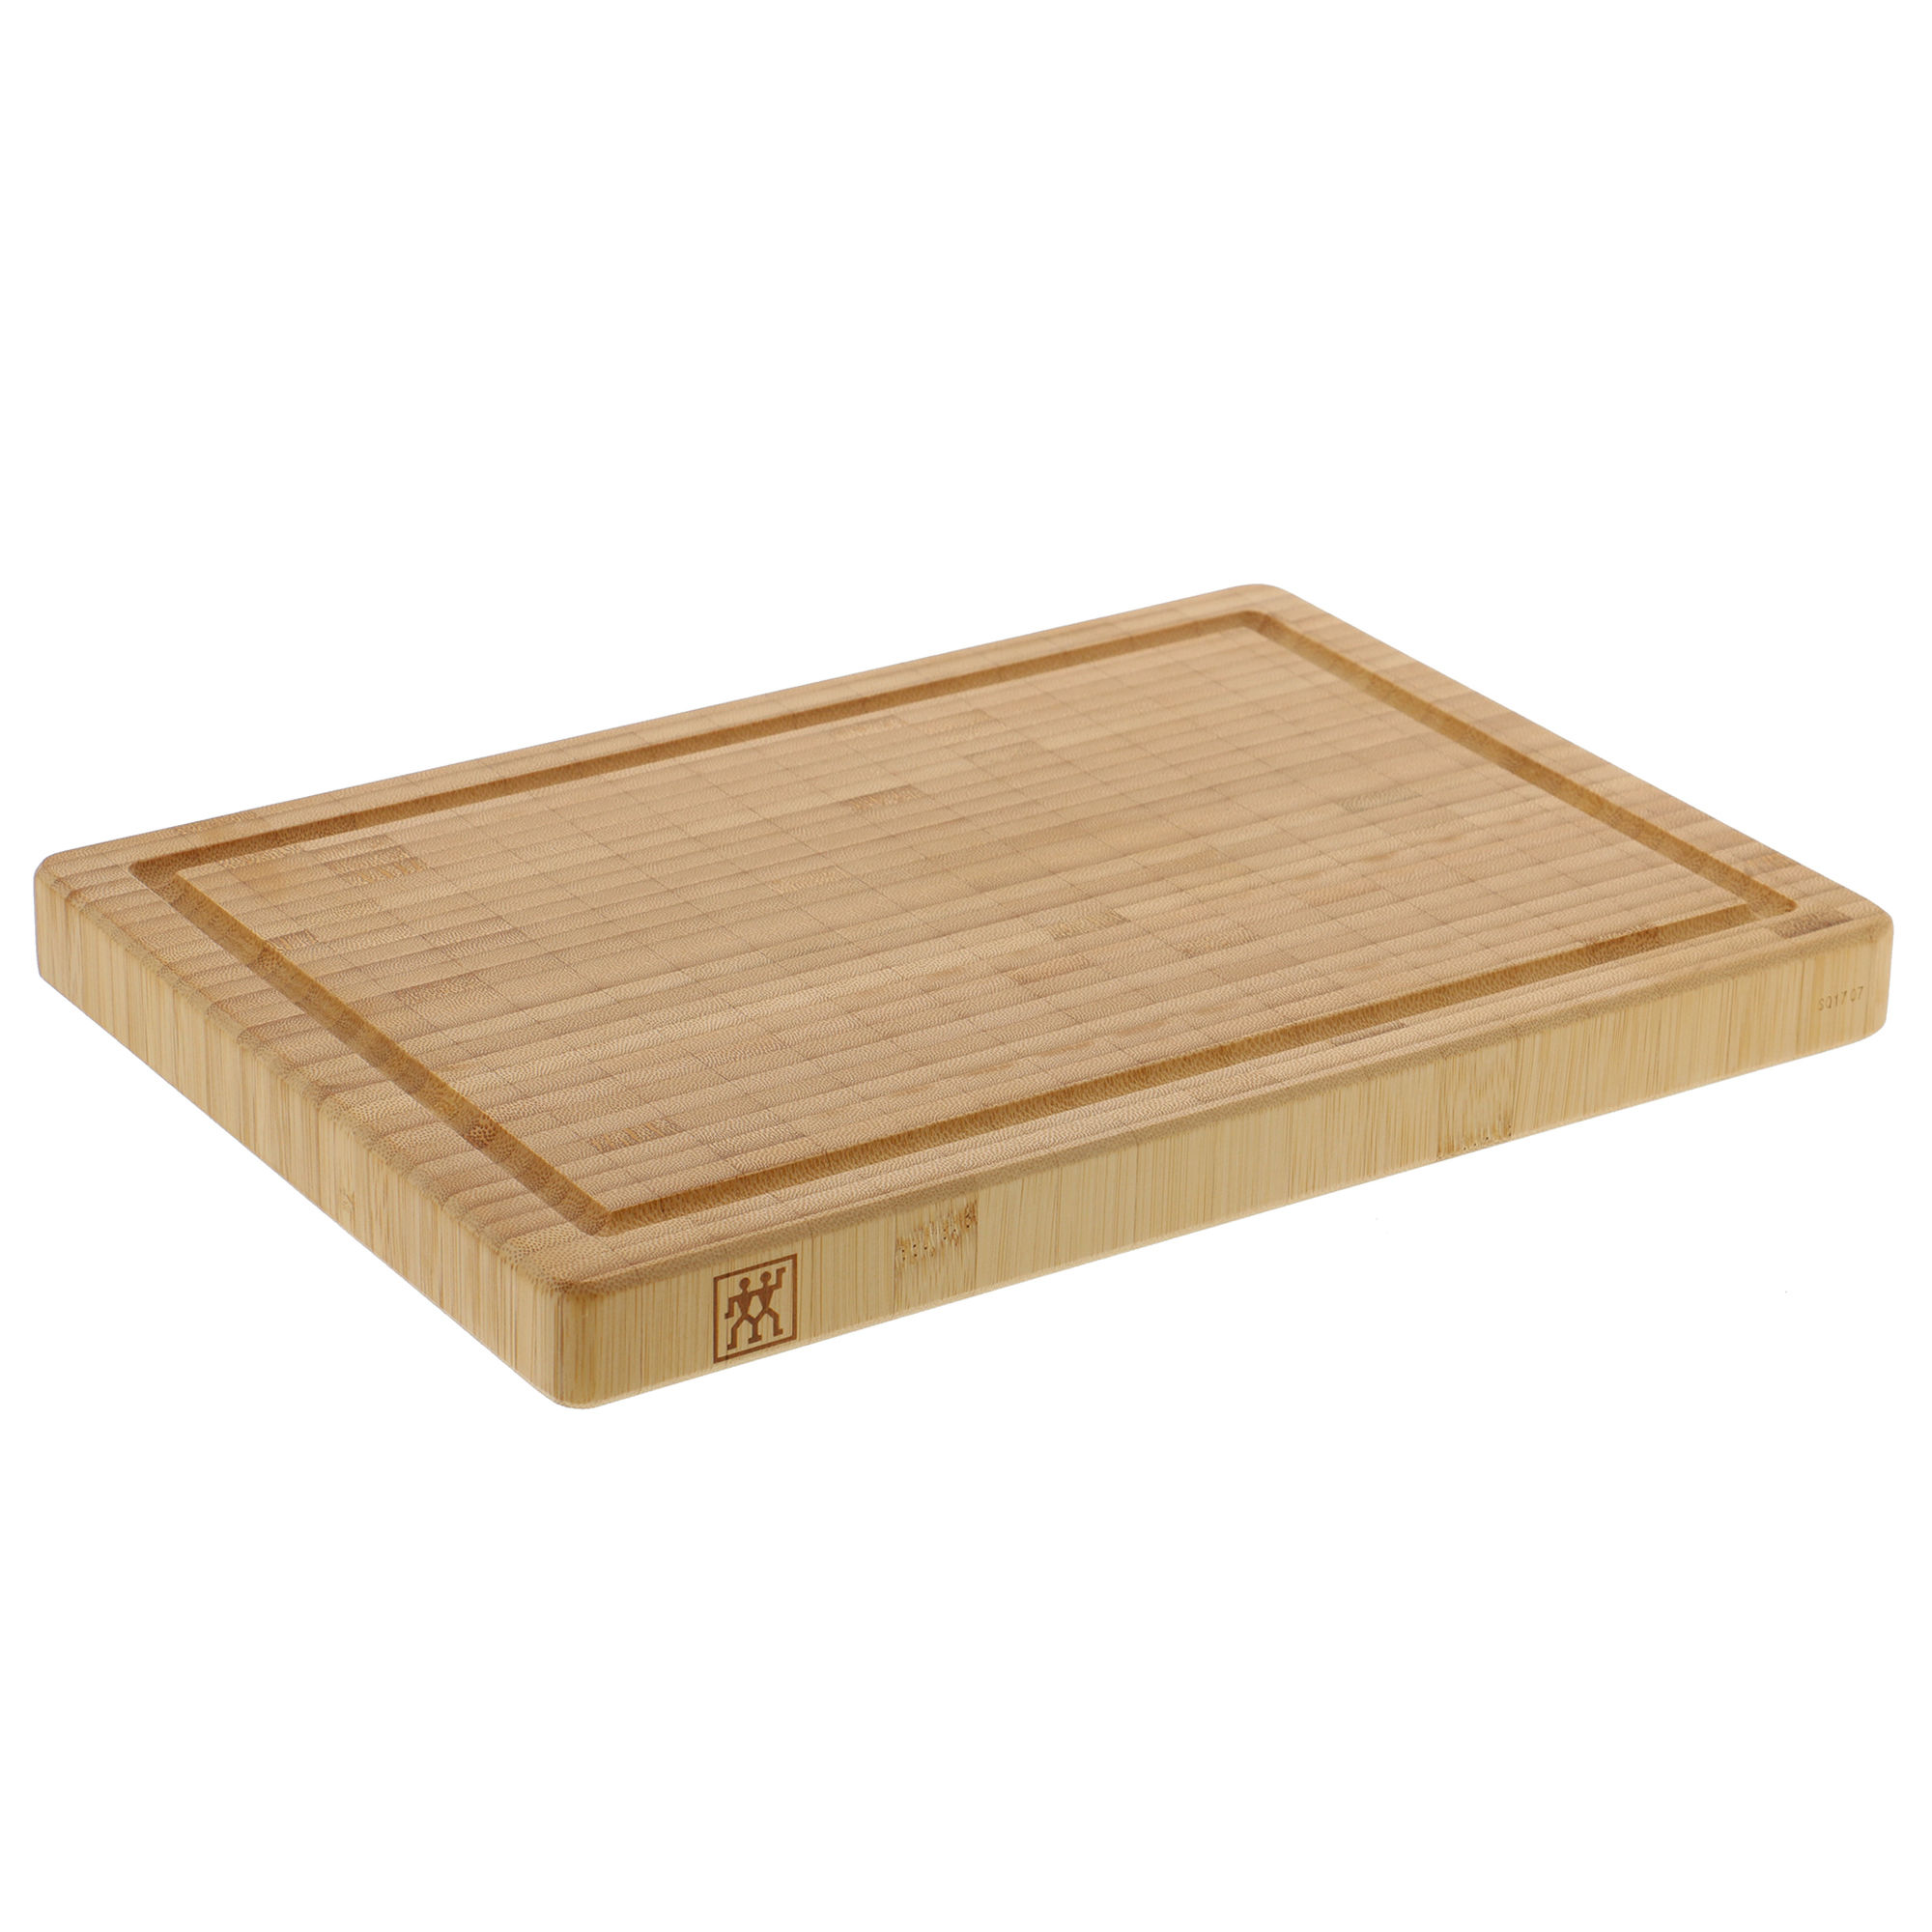 ZWILLING BBQ+ 15.5-inch x 12-inch Cutting Board with Tray, bamboo